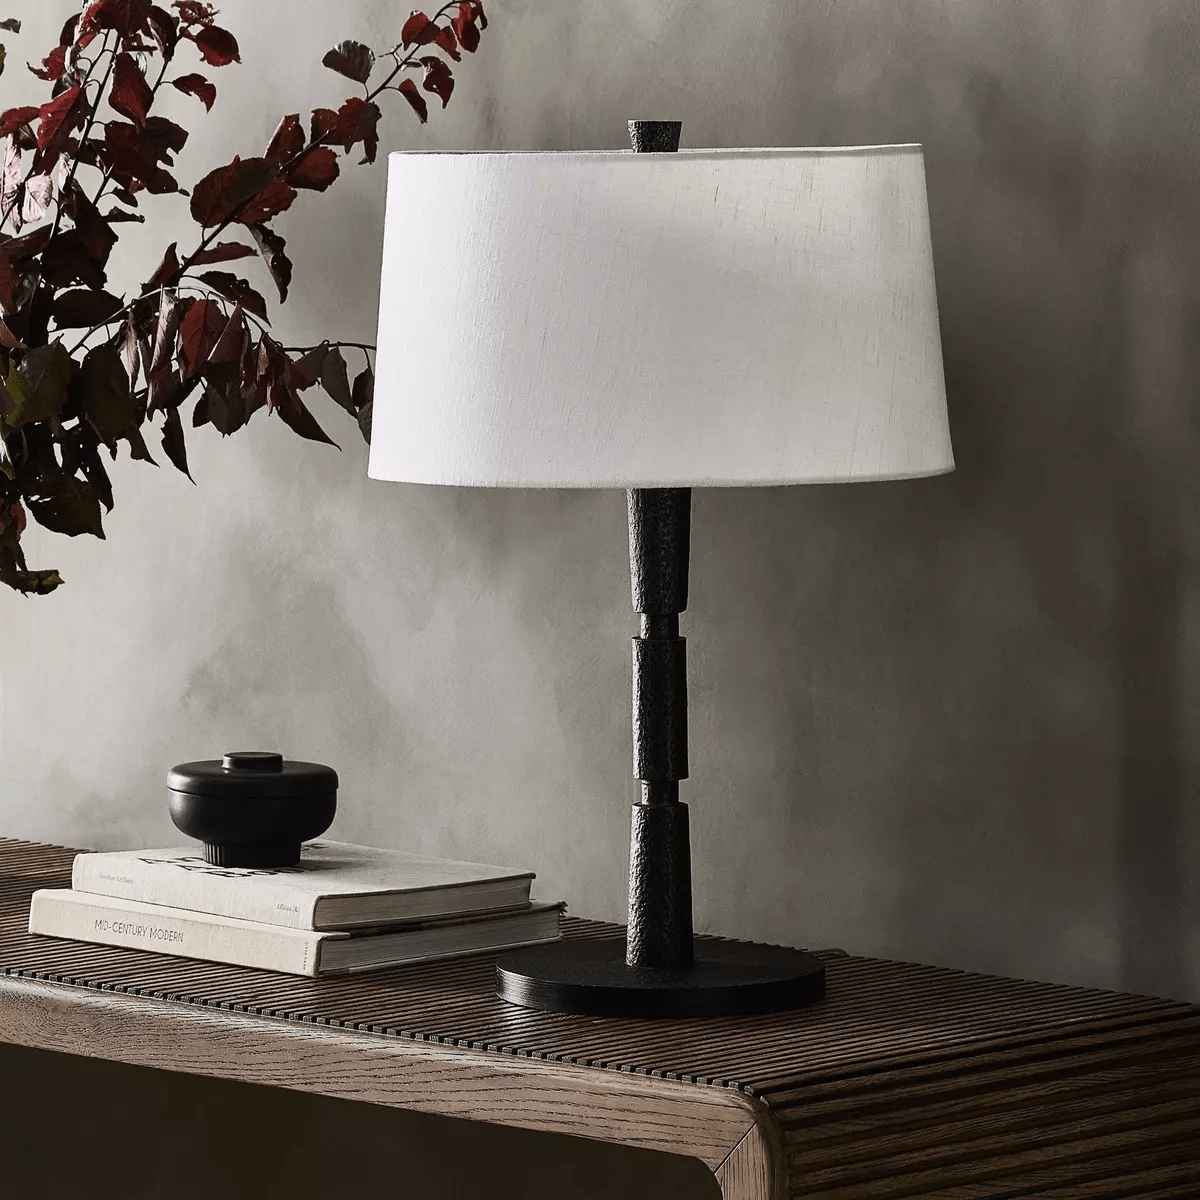 Four Hands Fernando Table Lamp Table Lamps four-hands-238589-001